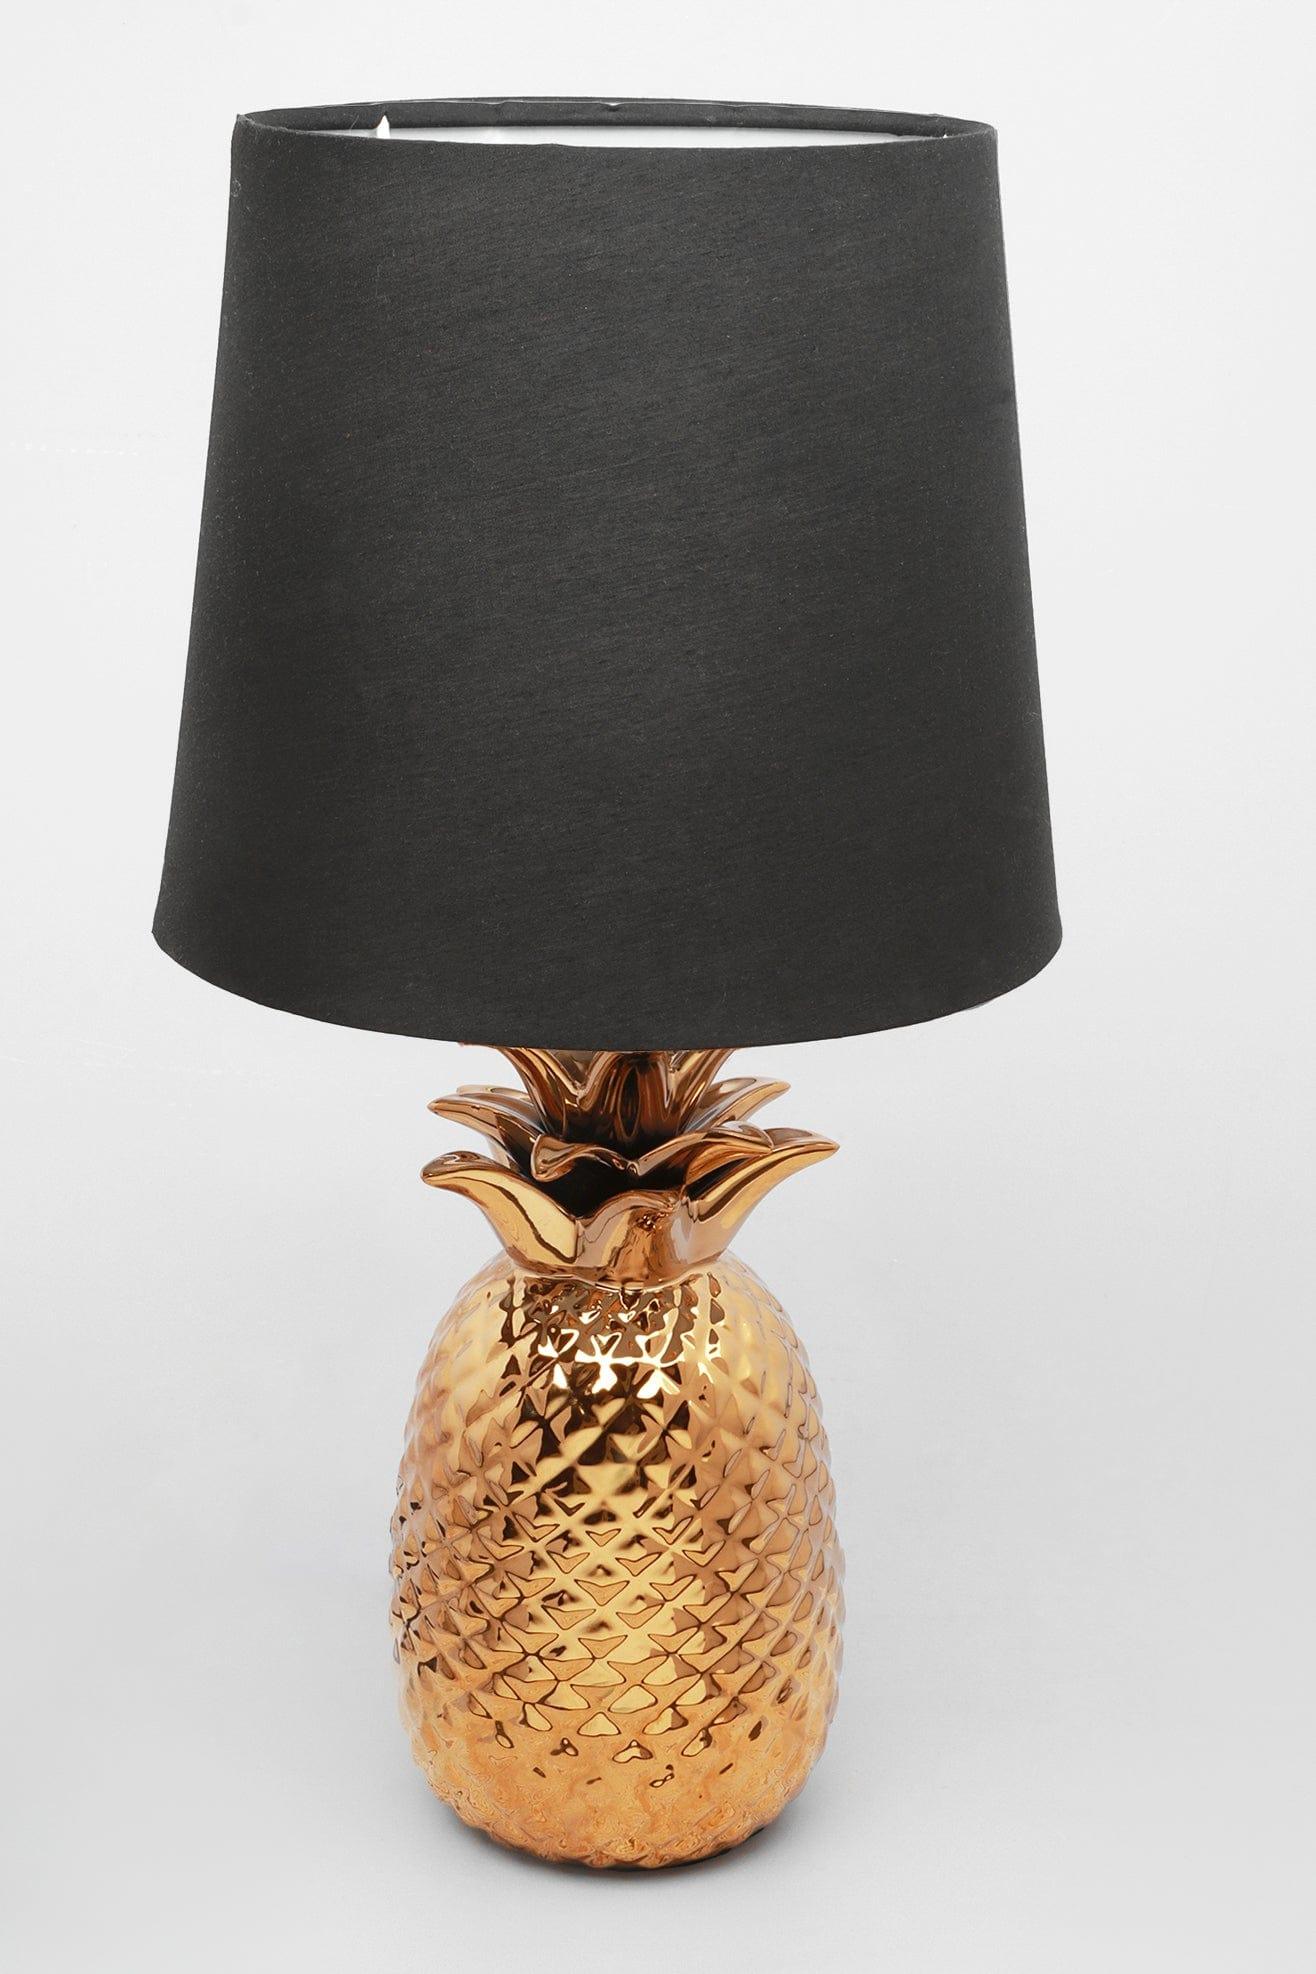 G Decor Lamps Gold Tang Gold Ceramic Pineapple Bedside Table Lamp